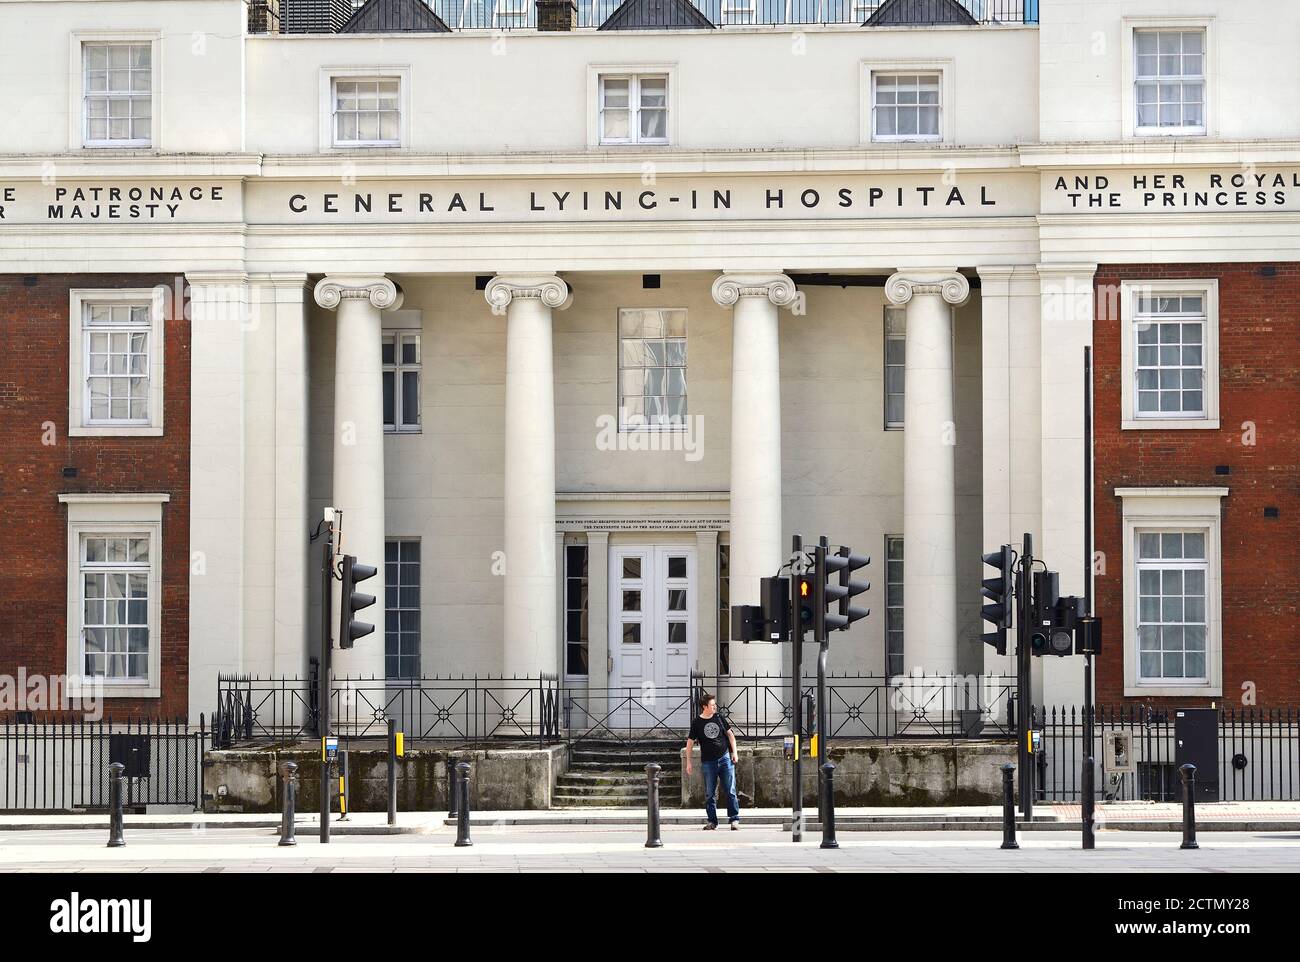 London, England, UK. The 'General Lying-In Hospital', Westminster Bridge Road, One of the first maternity hospitals in Great Britain. It opened in 176 Stock Photo